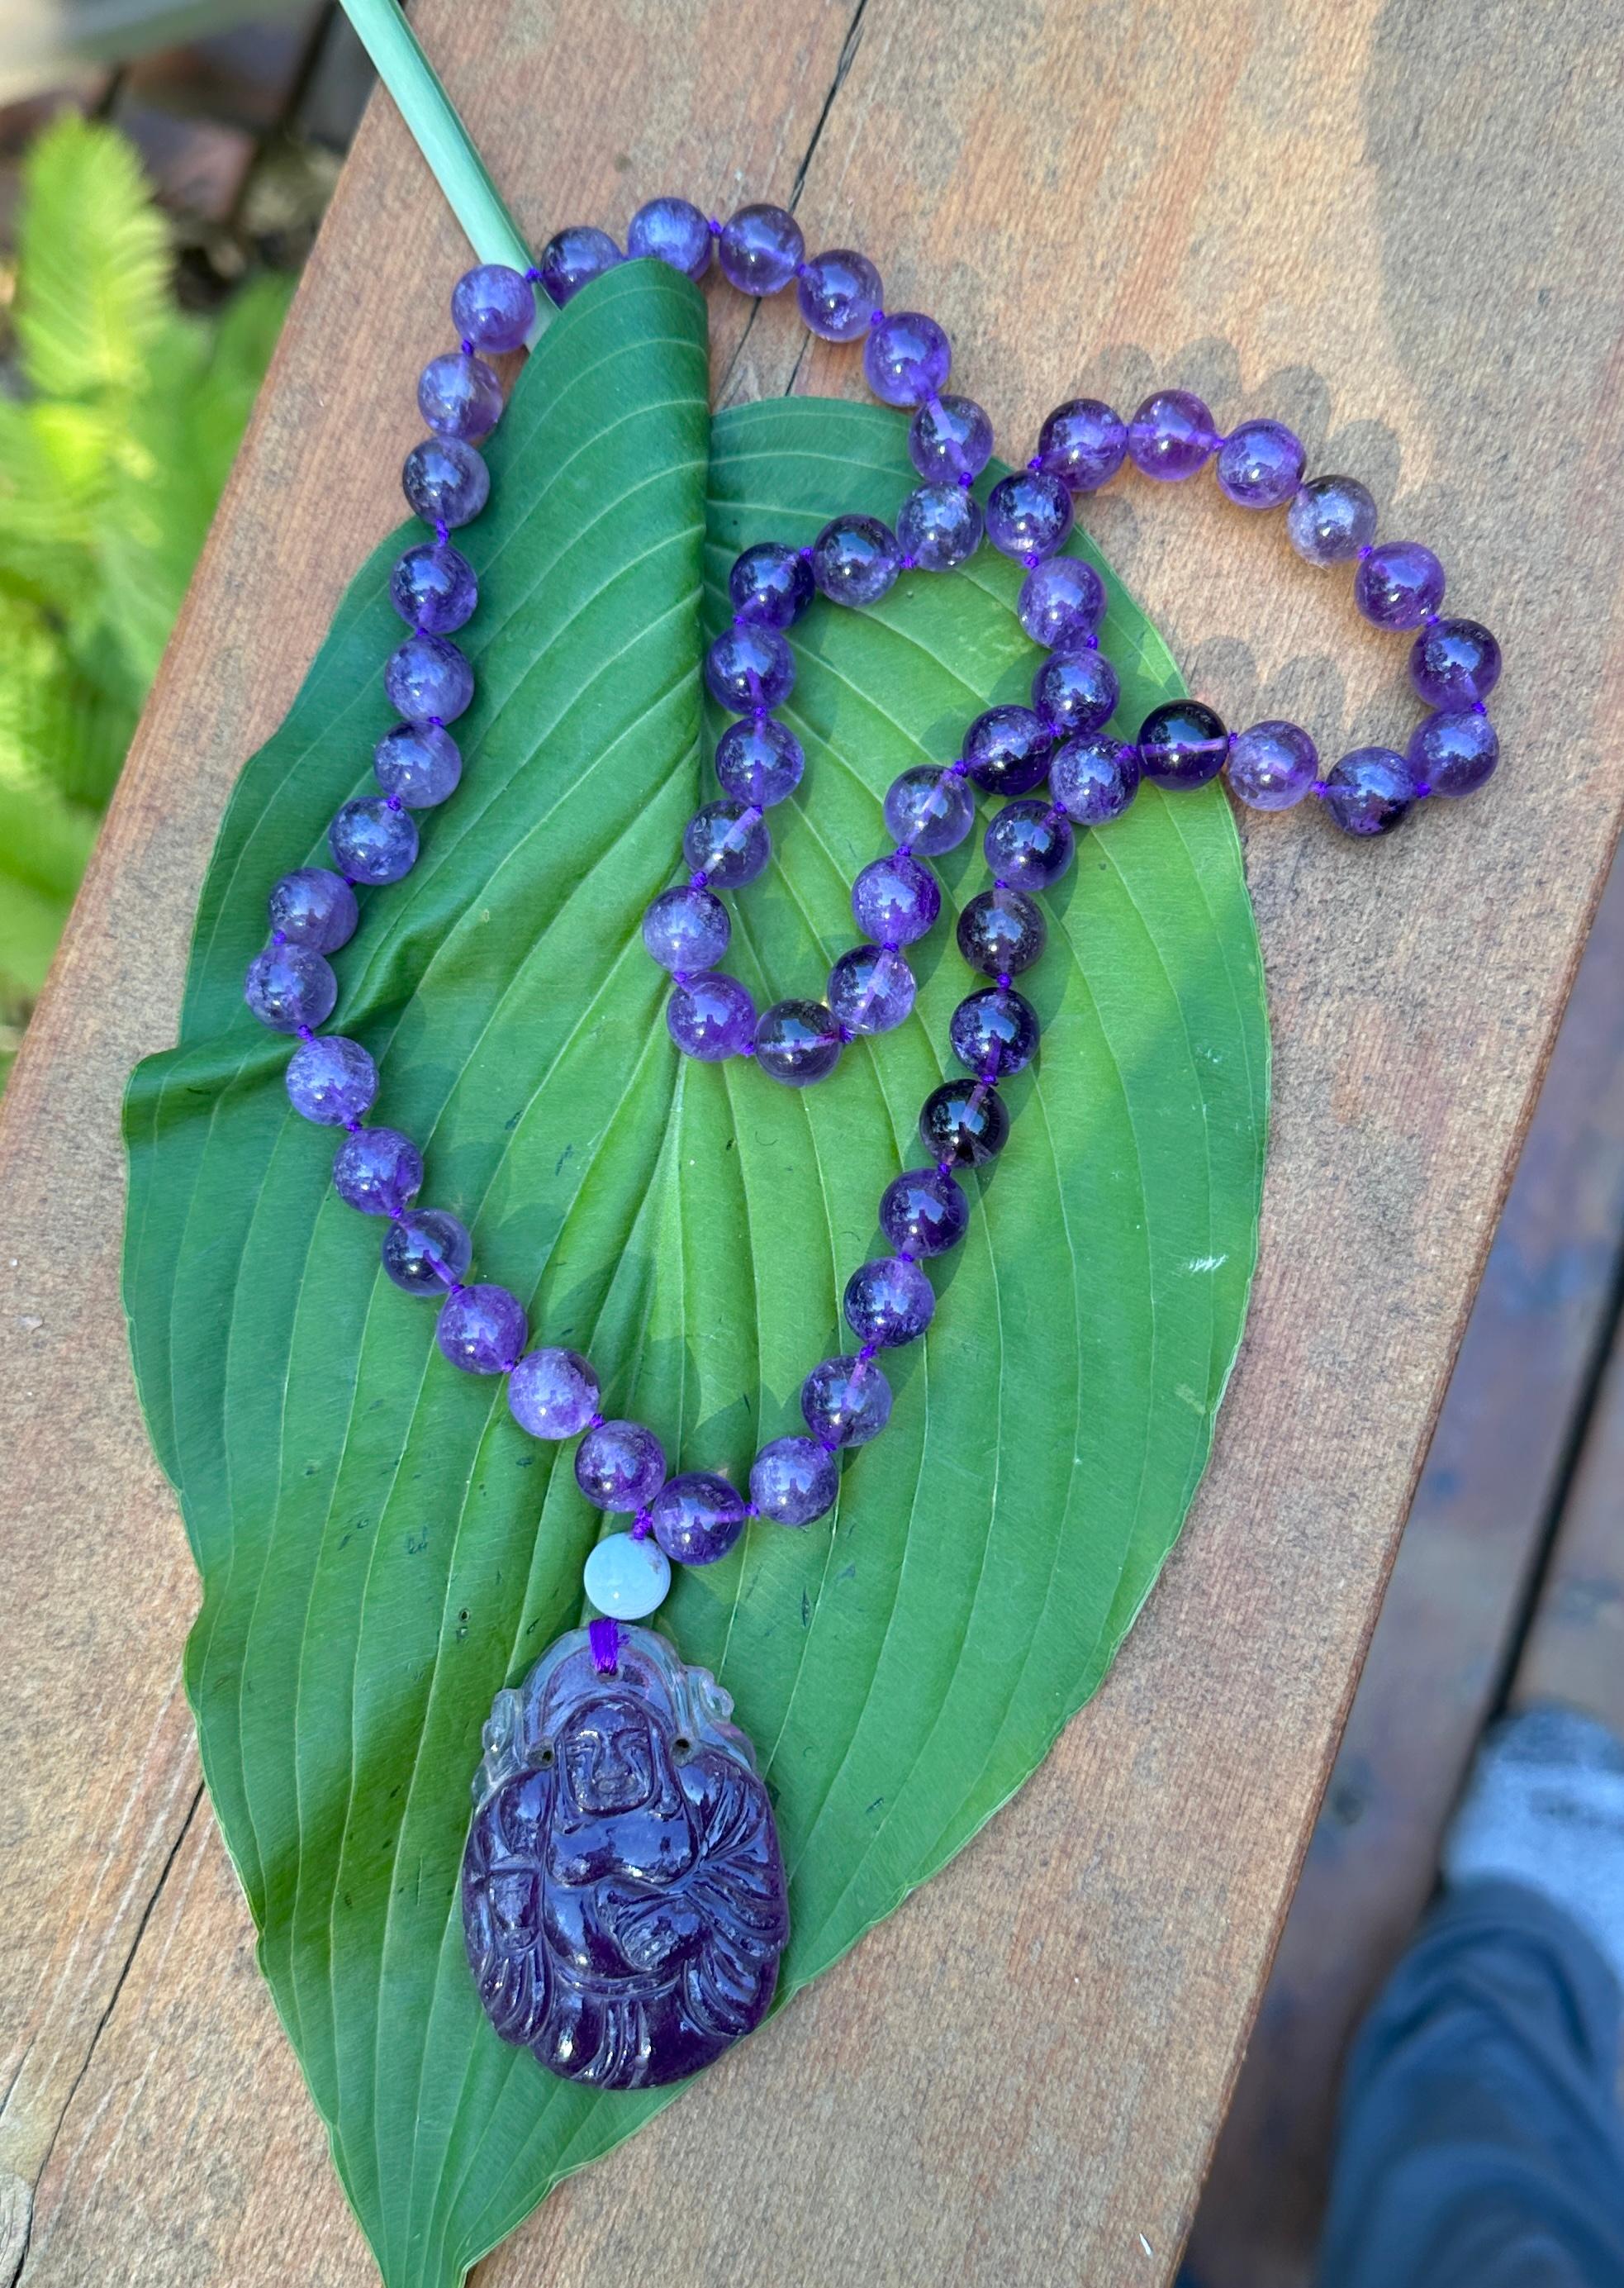 Amethyst Smiling Buddha Belly Pendant Necklace 27 Inch Amethyst Beads For Sale 4